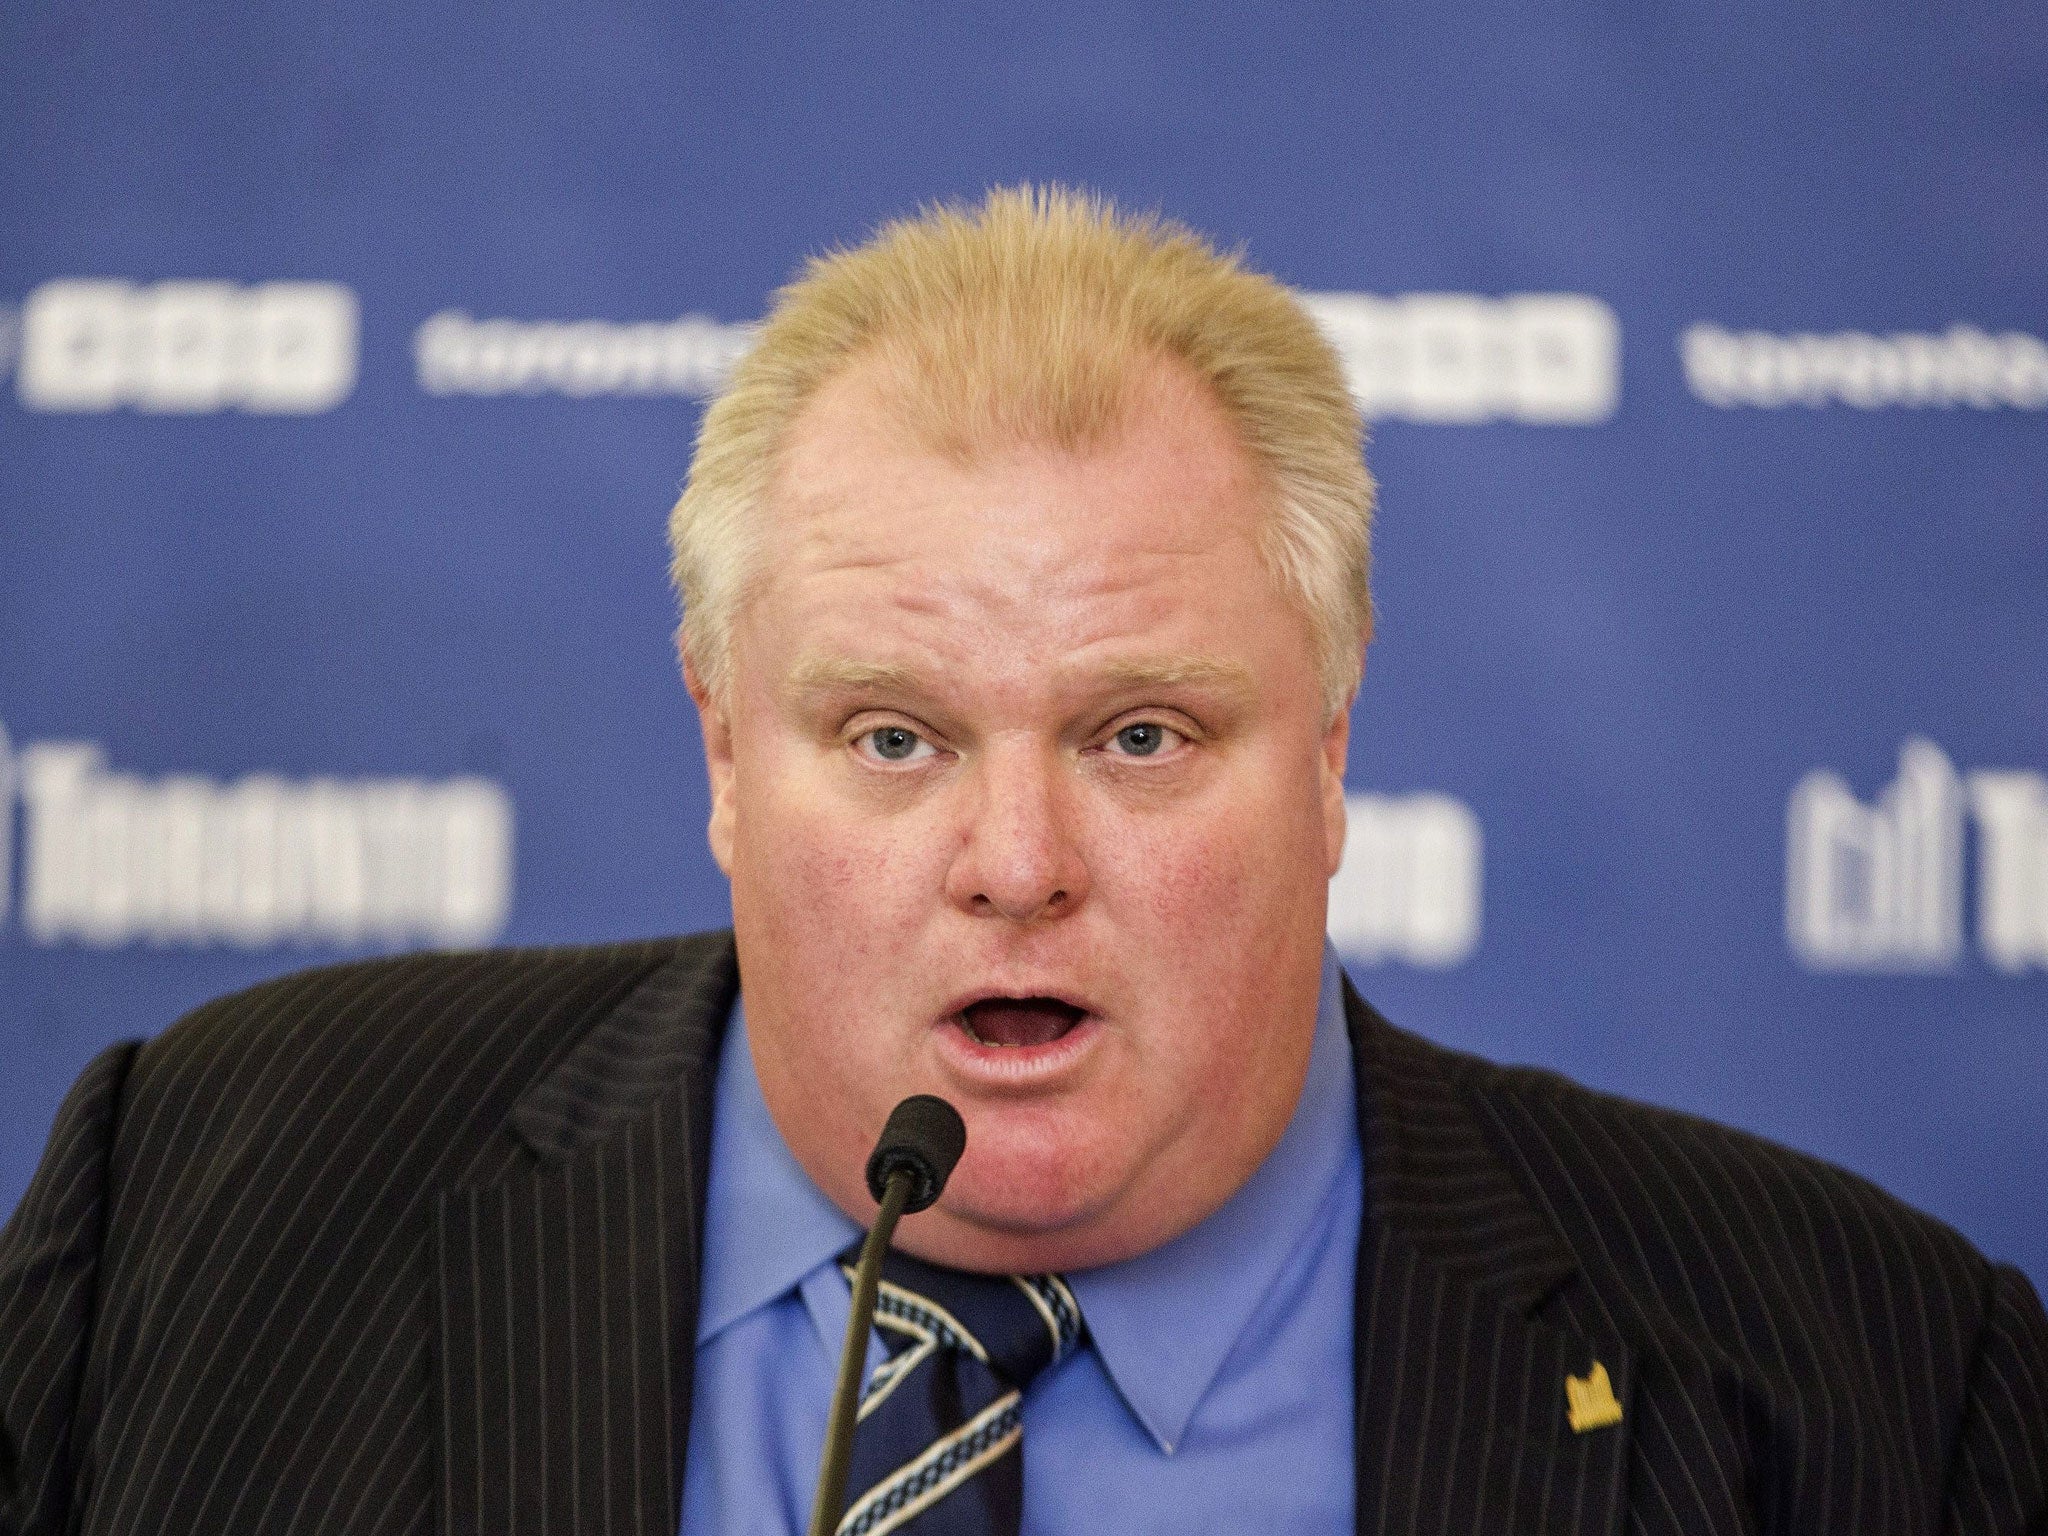 Mayor of Toronto Rob Ford had to issue an apology after falsely claiming a reporter took photos of his children